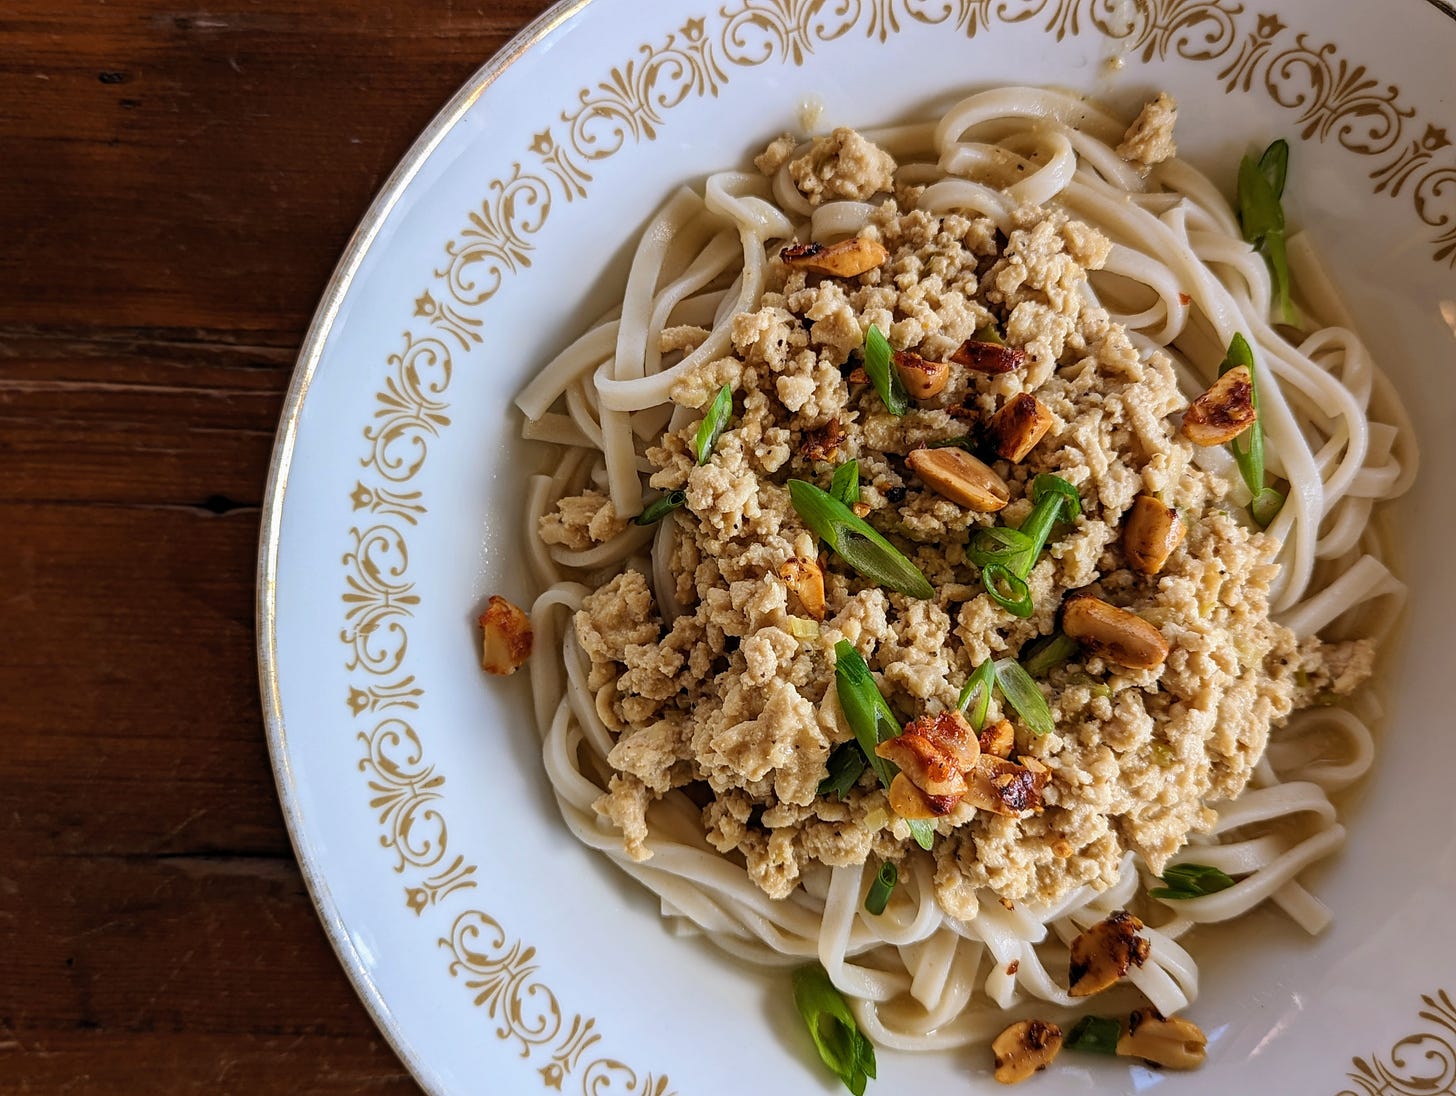 A bowl full of dan dan noodles made with ground chicken and topped with green onions and fried peanuts.